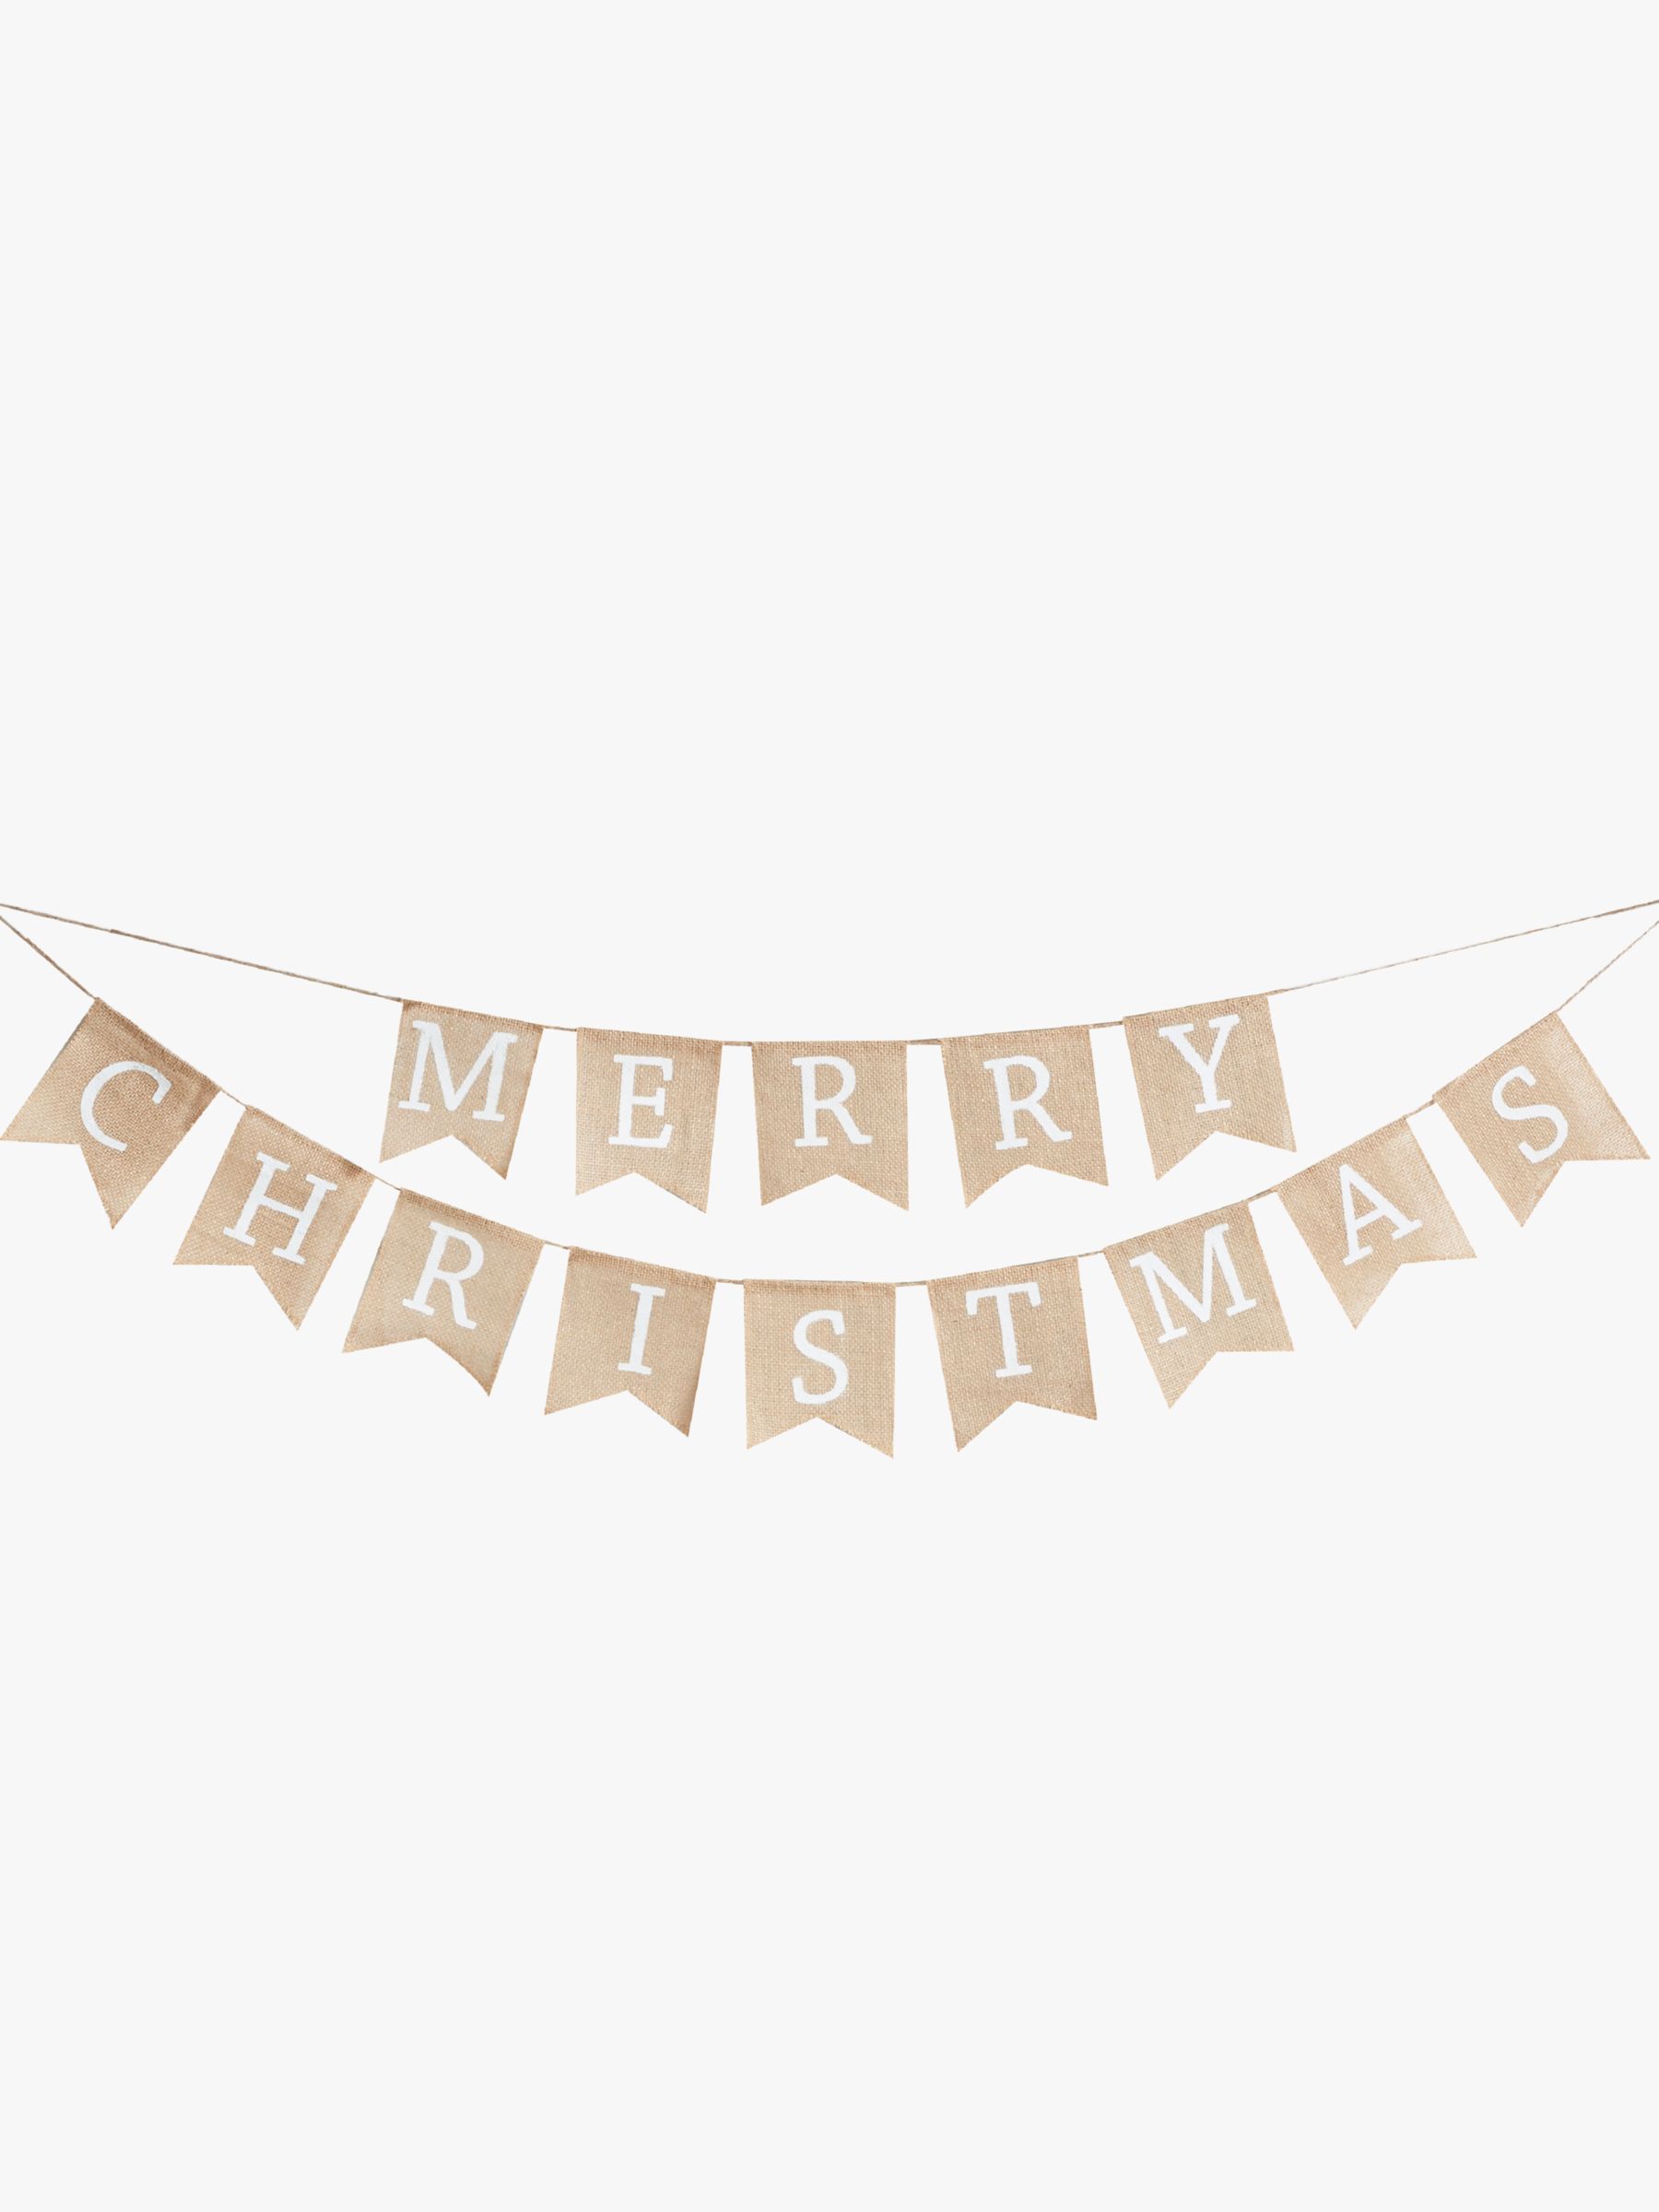 Ginger Ray Merry Christmas Hessian Bunting at John Lewis & Partners